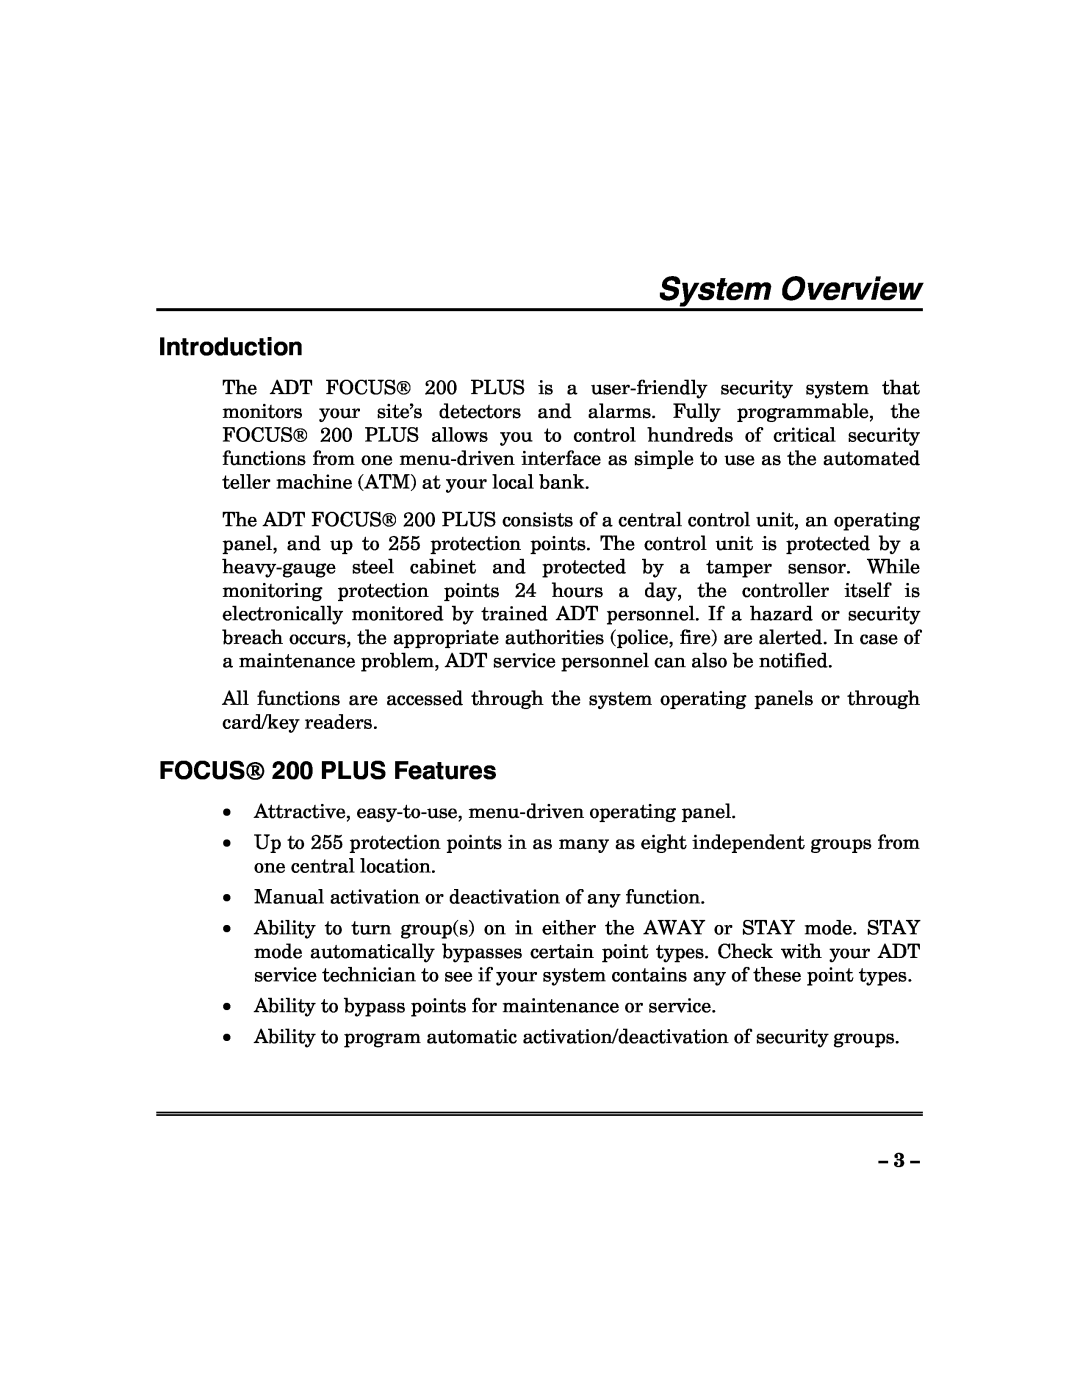 ADT Security Services 200 Plus manual System Overview, Introduction, FOCUS 200 PLUS Features 